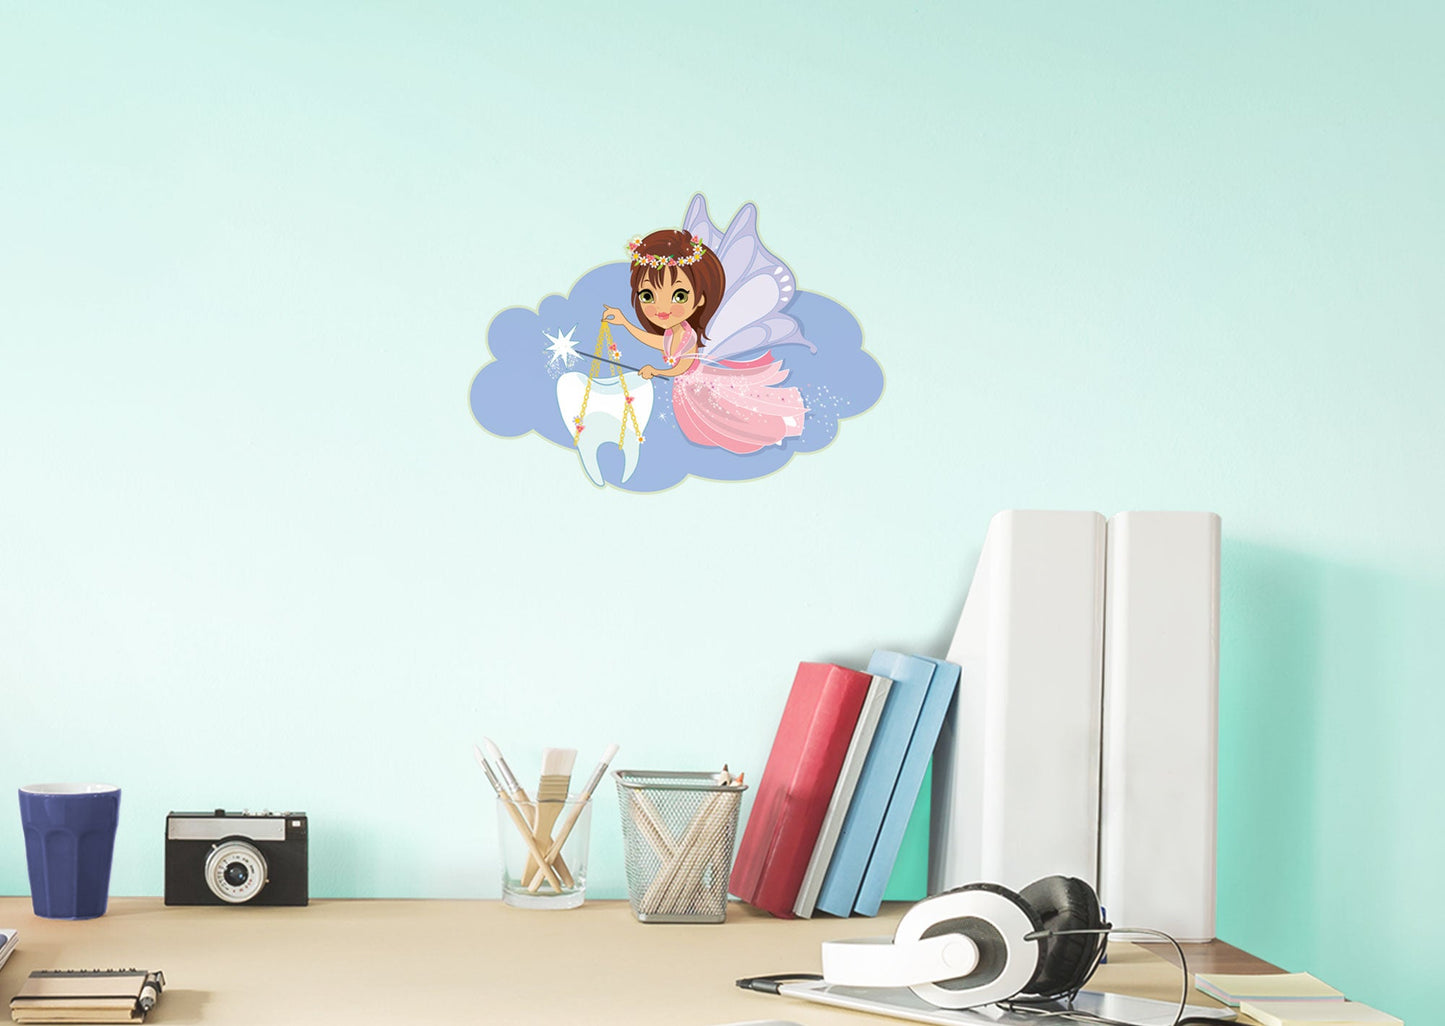 Nursery:  Tooth Fairy Icon        -   Removable     Adhesive Decal